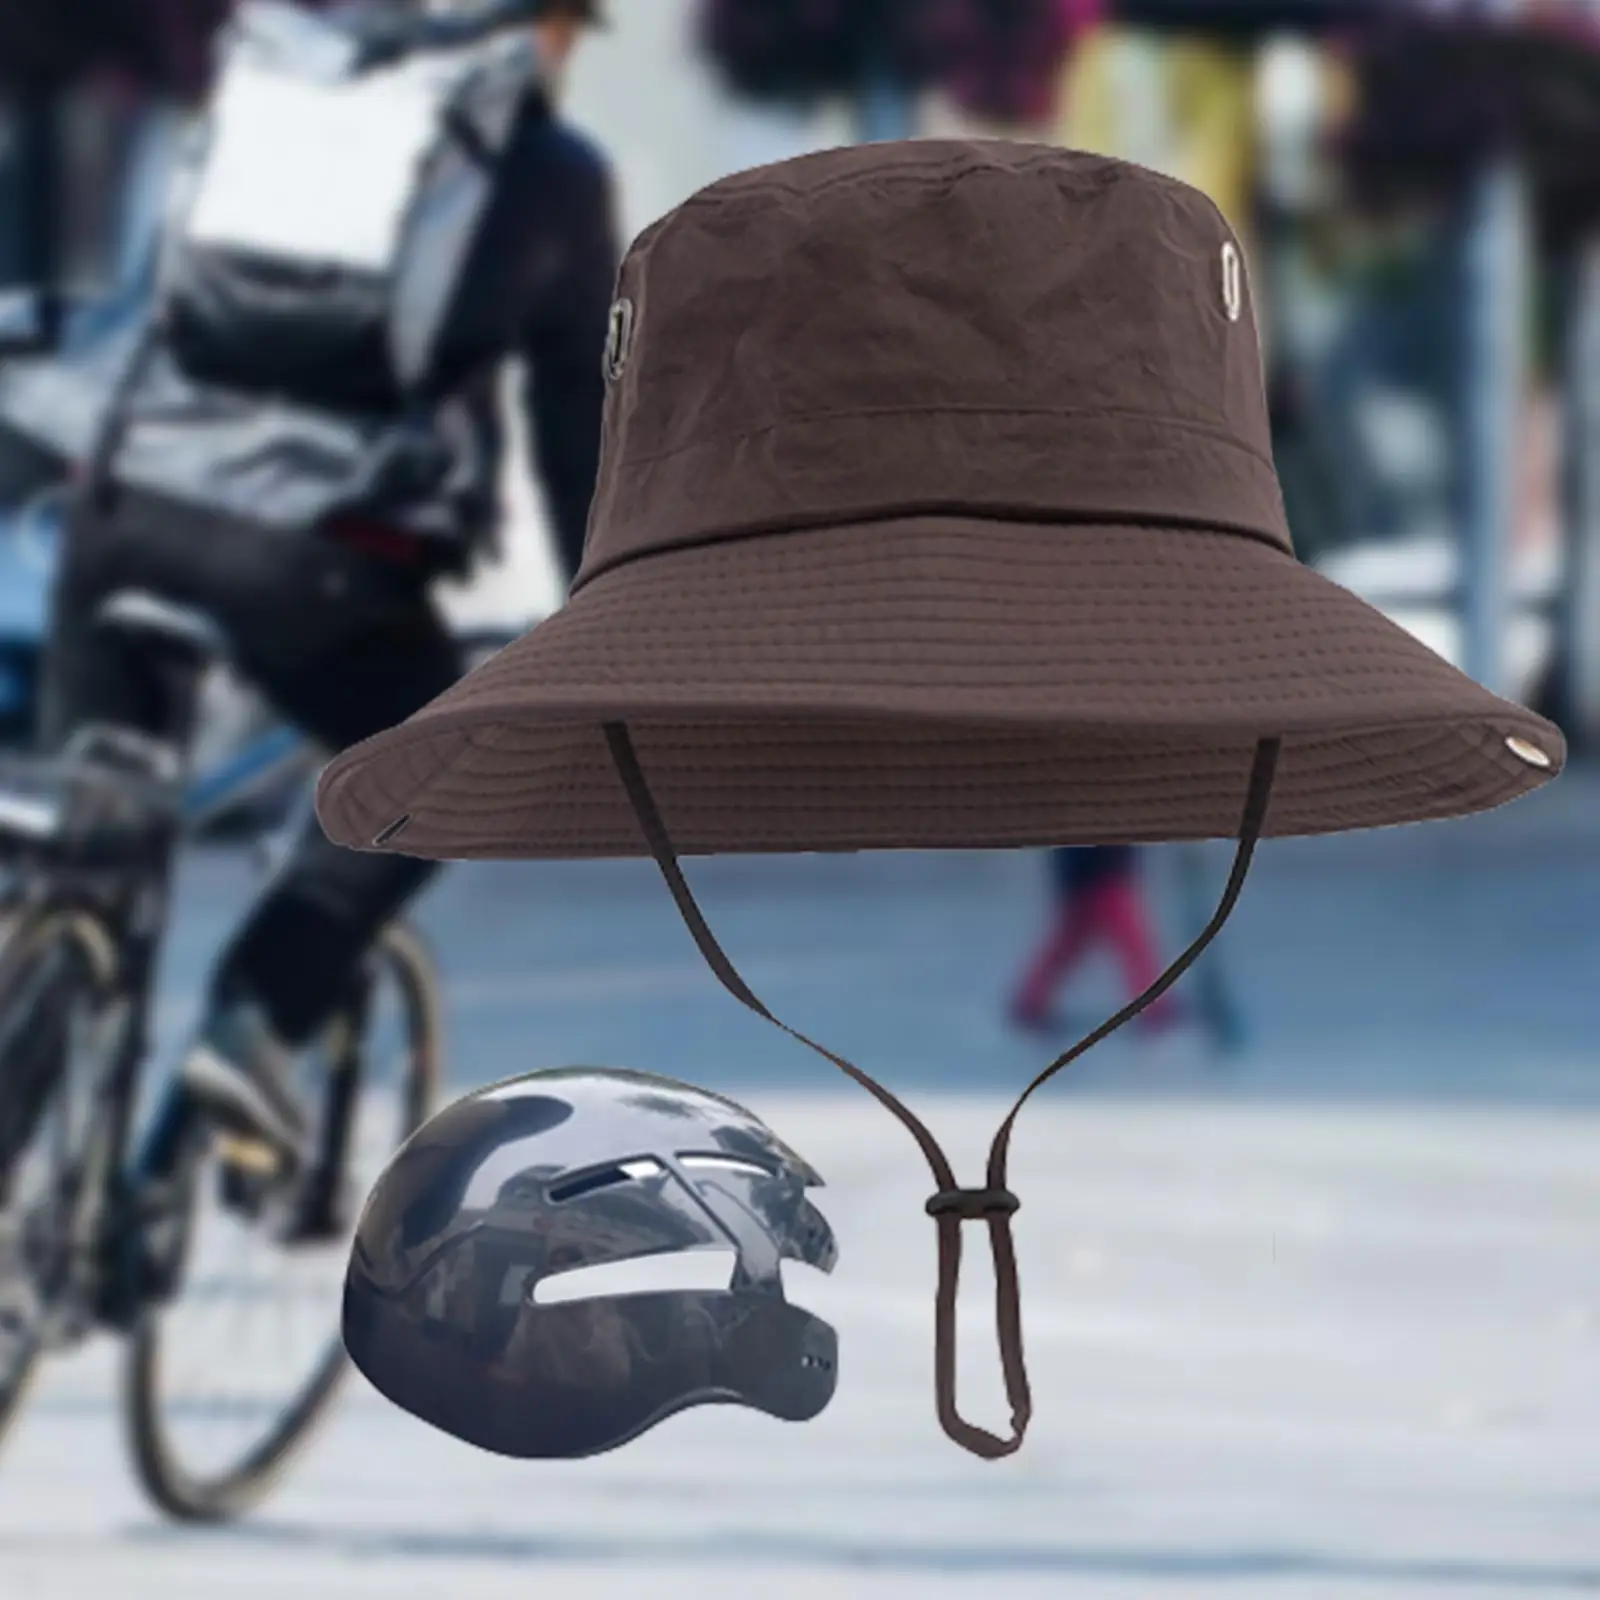 Bucket Hat with Strings Lightweight Helmet Sun Hat for Outdoor Riding  Travel - AliExpress